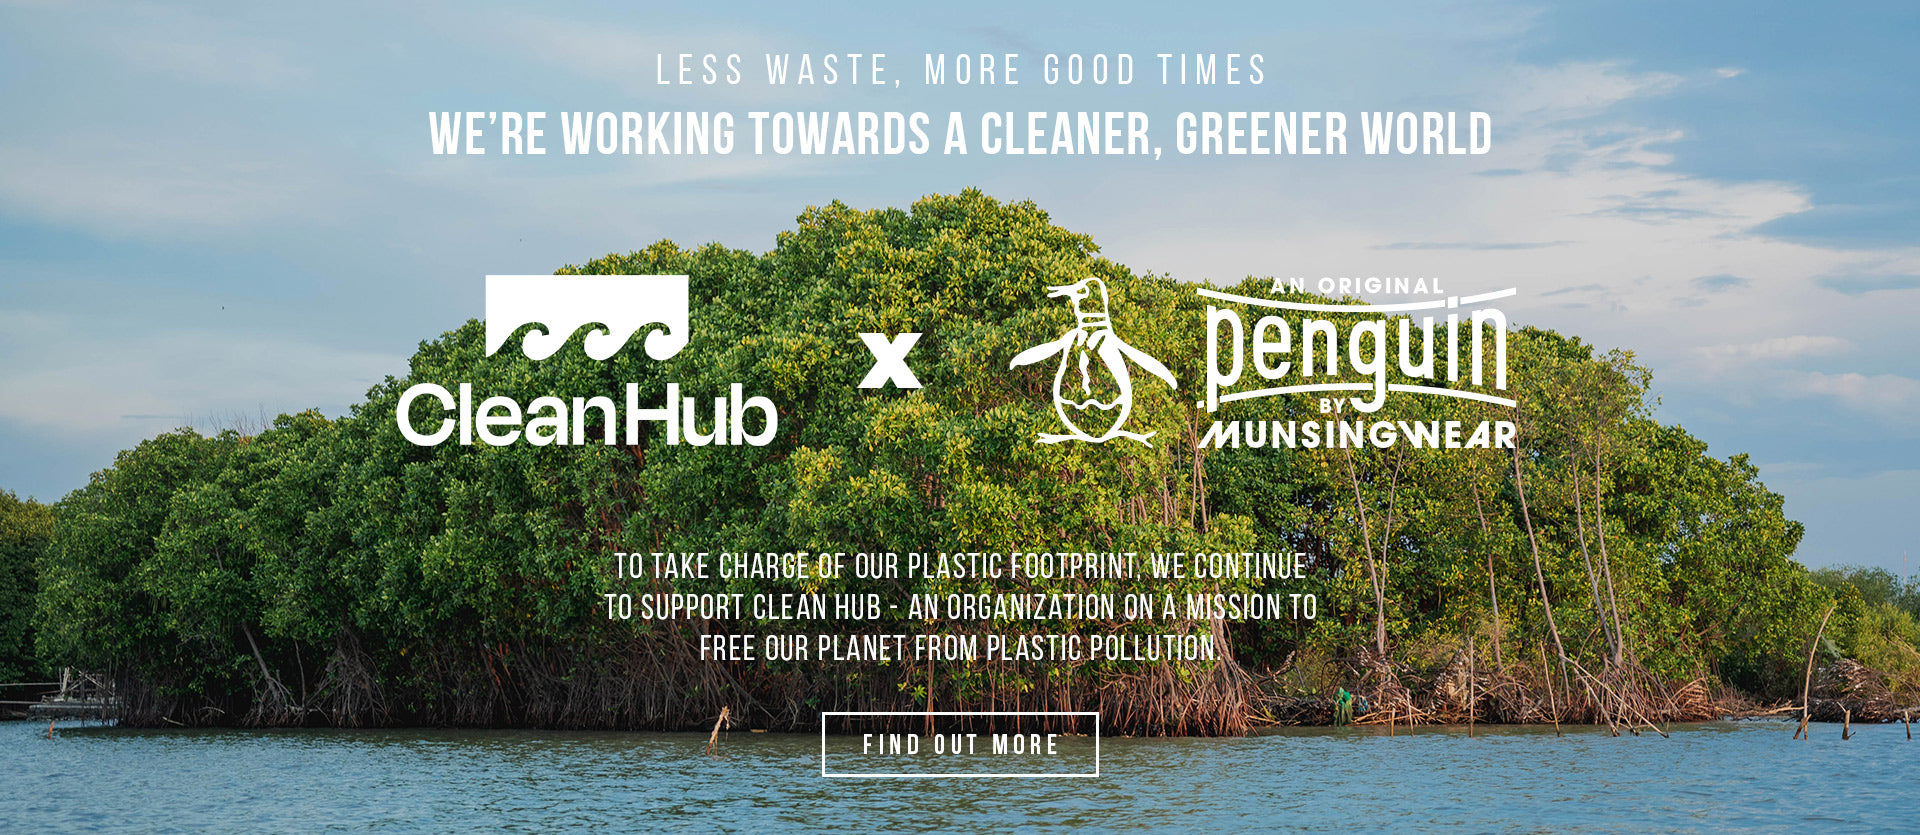 WE’RE WORKING TOWARDS A CLEANER, GREENER WORLD+